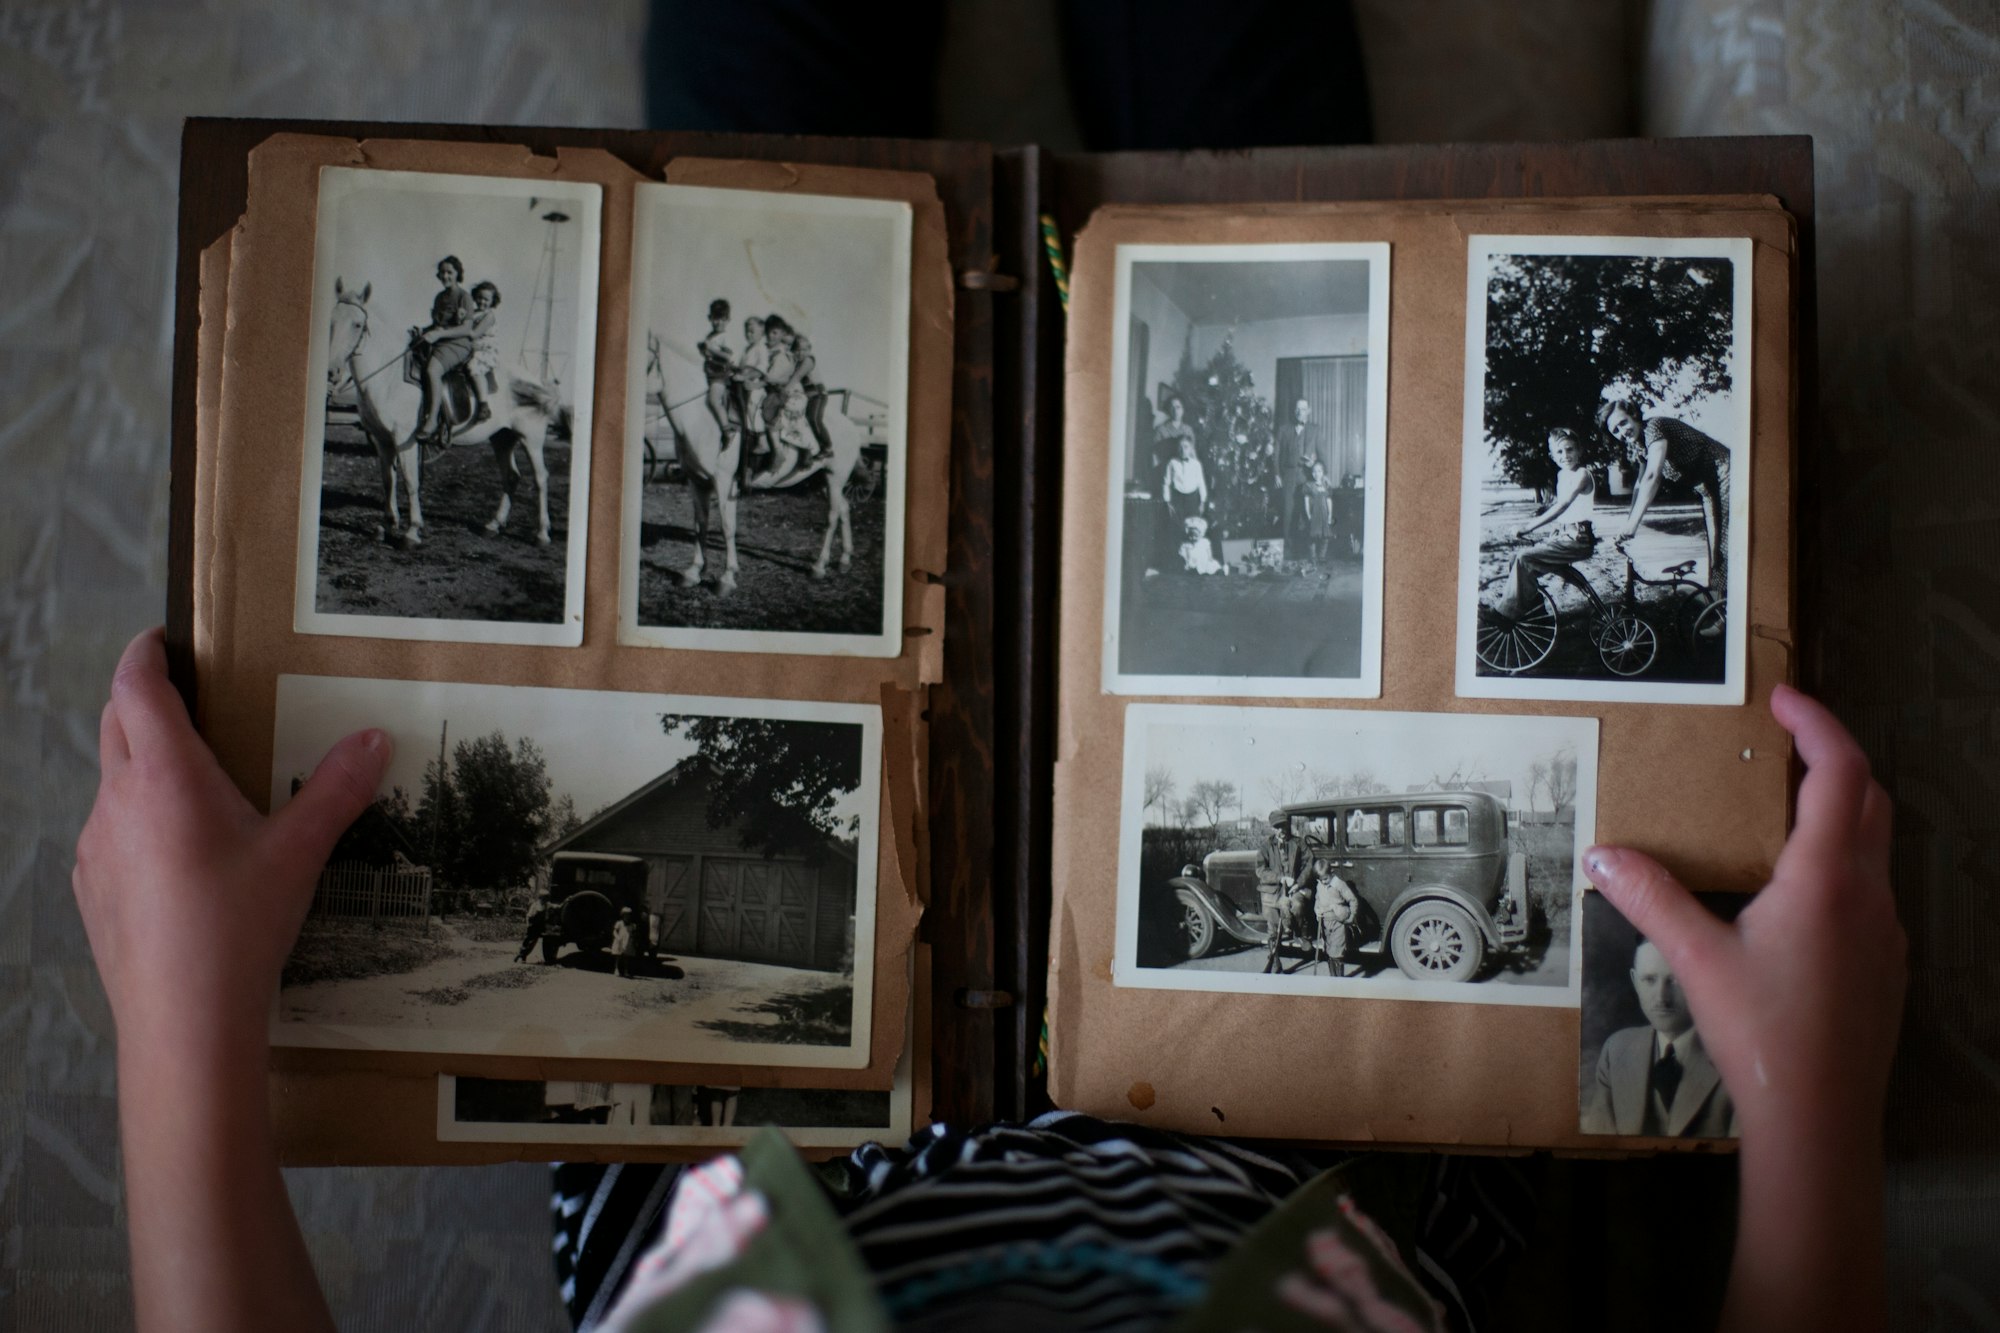 We pulled out some of the old photo albums from my family, and loved seeing my kids look through them. Photos are timeless and the thing that we can pass through generations to tell our stories.